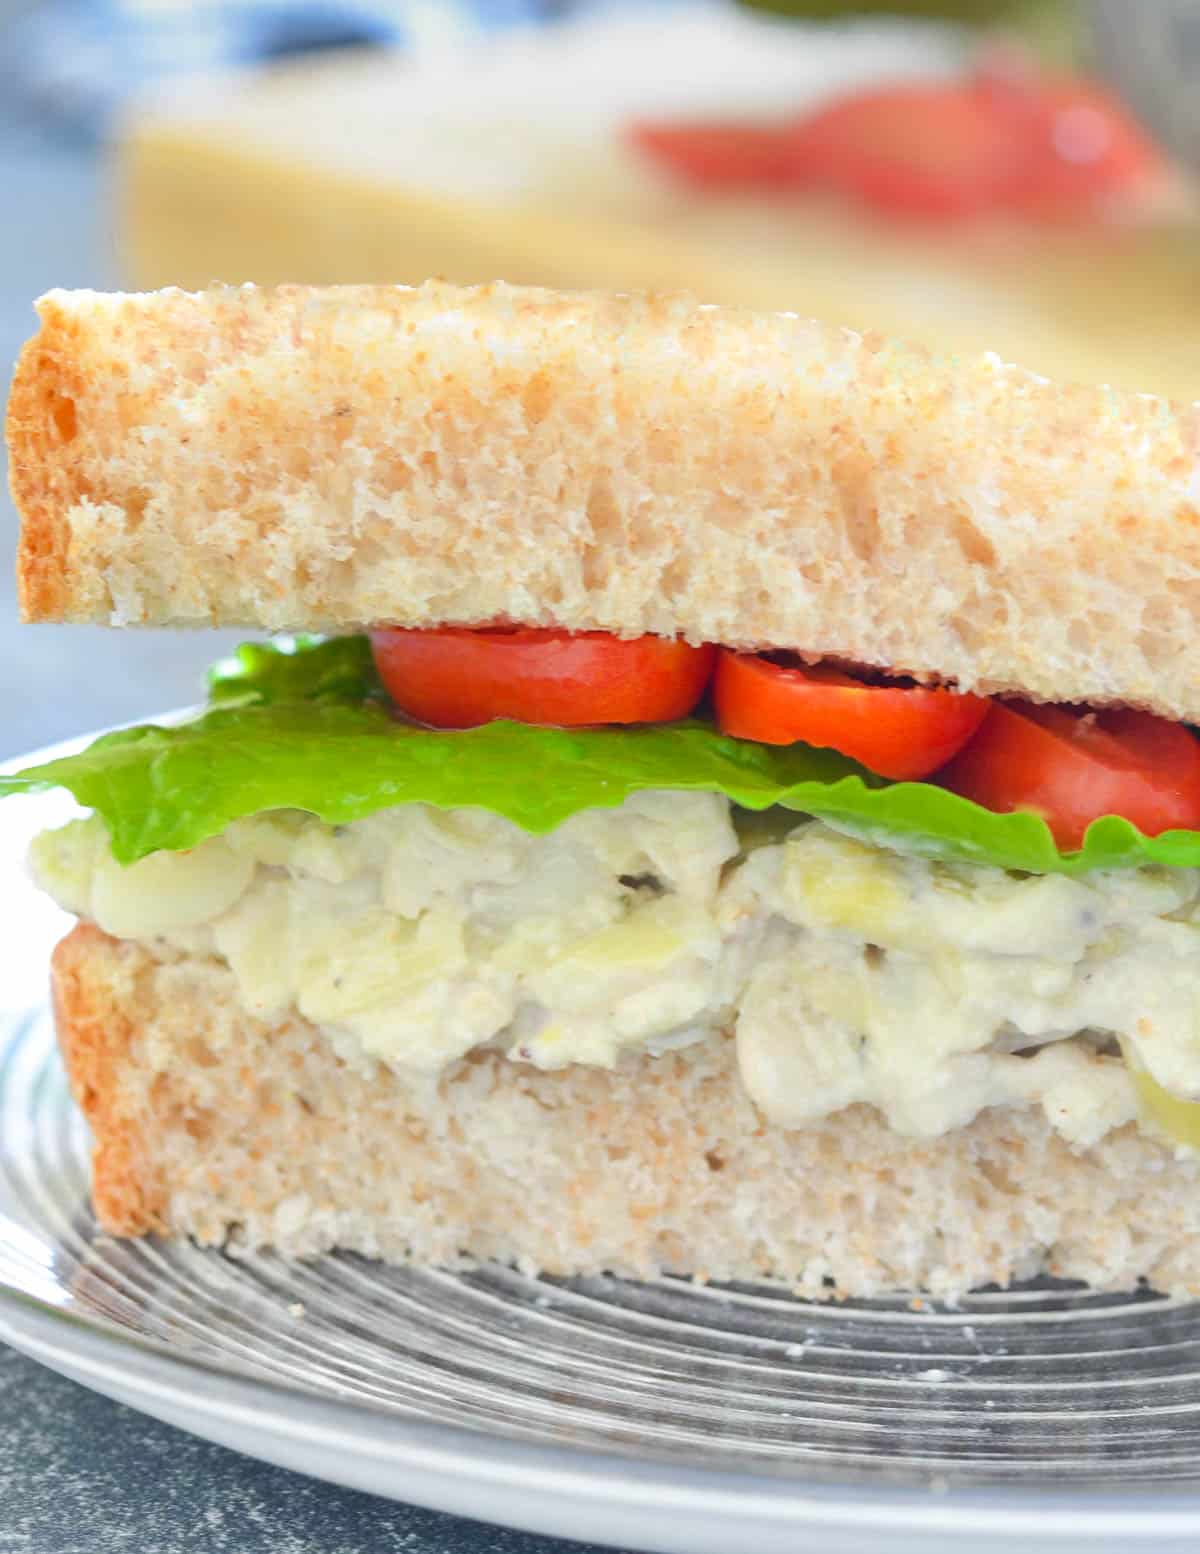 close up of a sandwich with creamy white bean and artichoke filling, lettuce and tomato